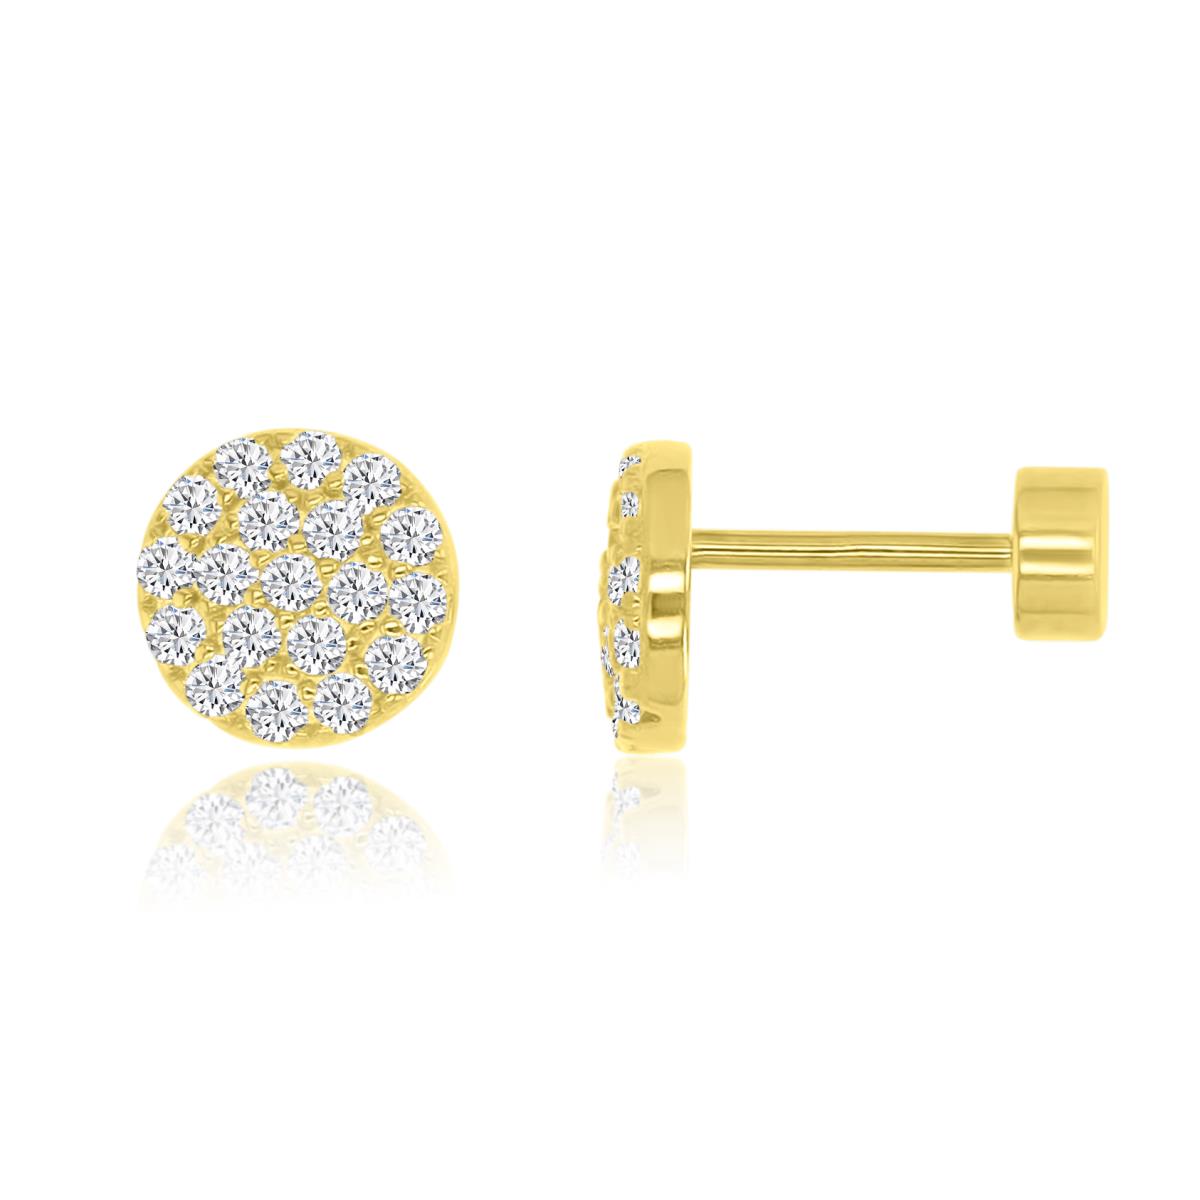 Sterling Silver Yellow 7x7mm Micropave CZ Round Flat Back Stud Earrings